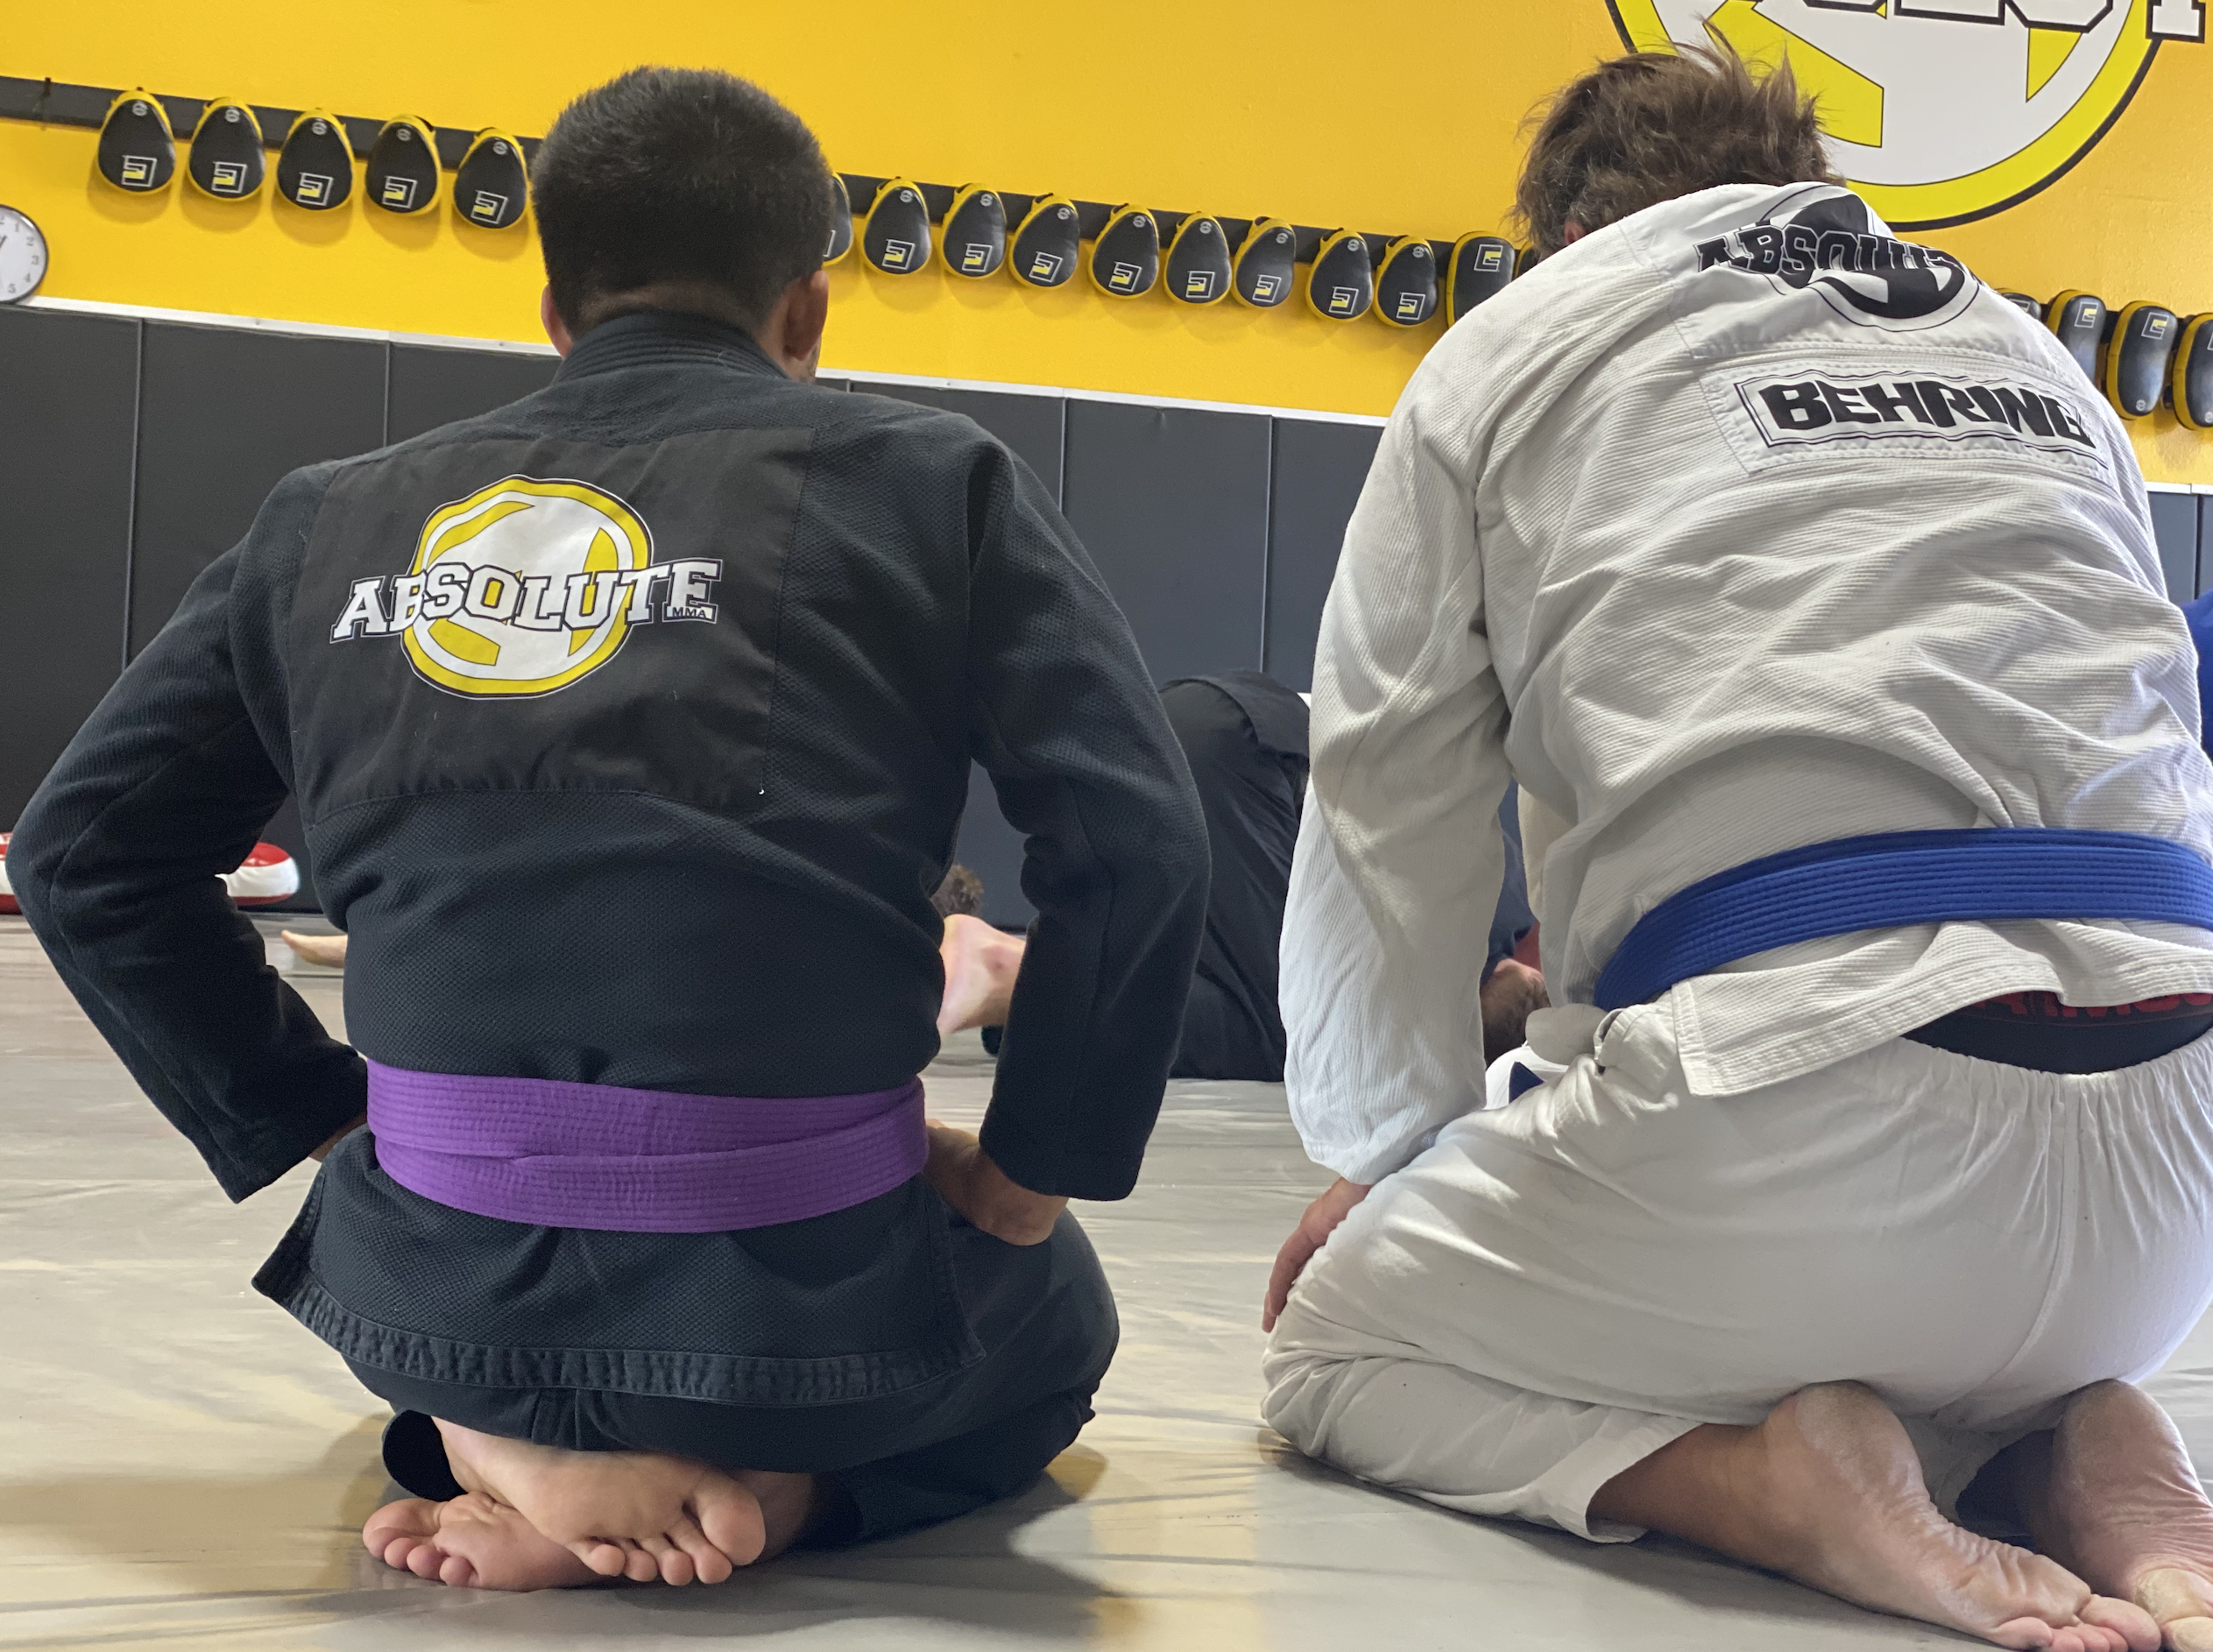 The Best Judo and BJJ Grappling Knee Pads for Sale